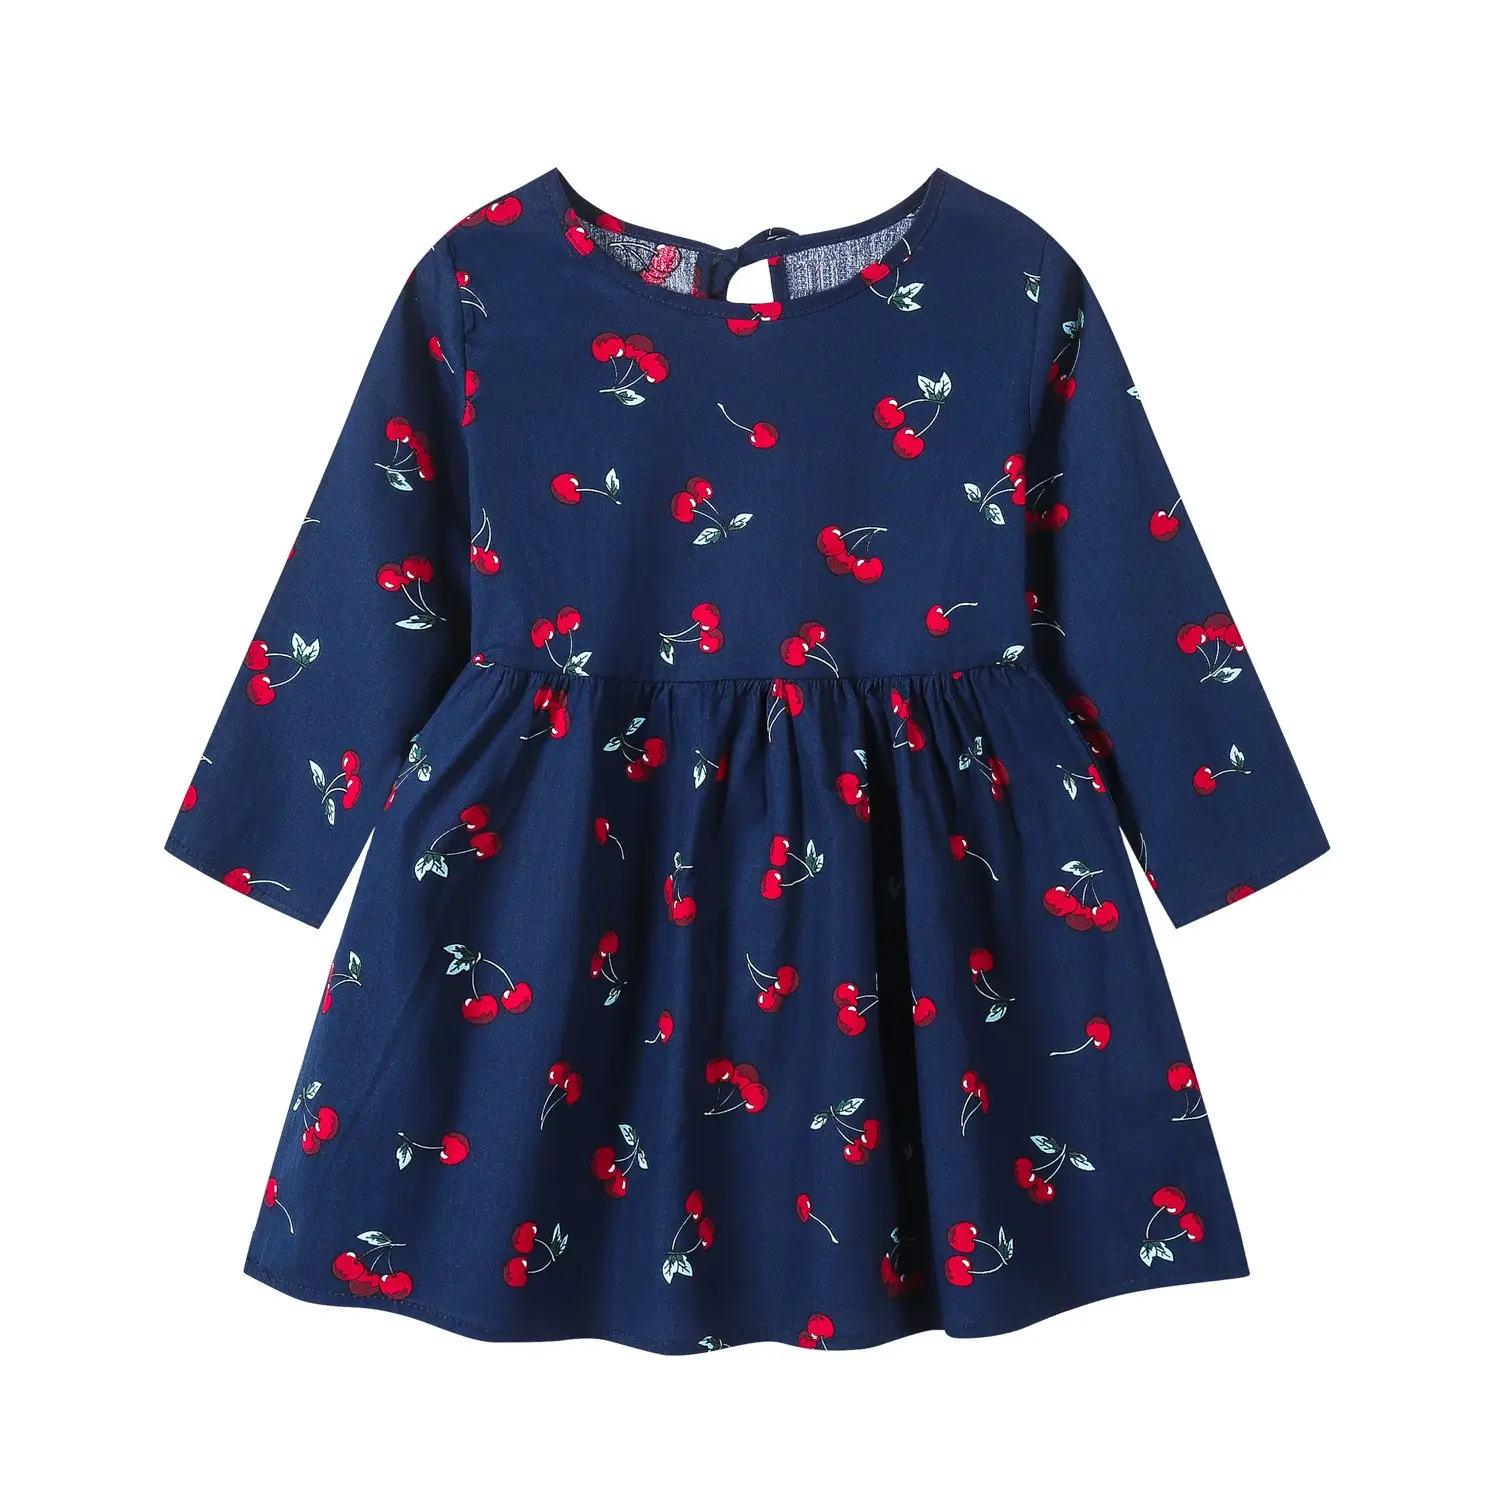 2021 Spring and Autumn New Girls' Korean-Style Long-Sleeved Children Cotton Printed Children's Floral Princess Dress